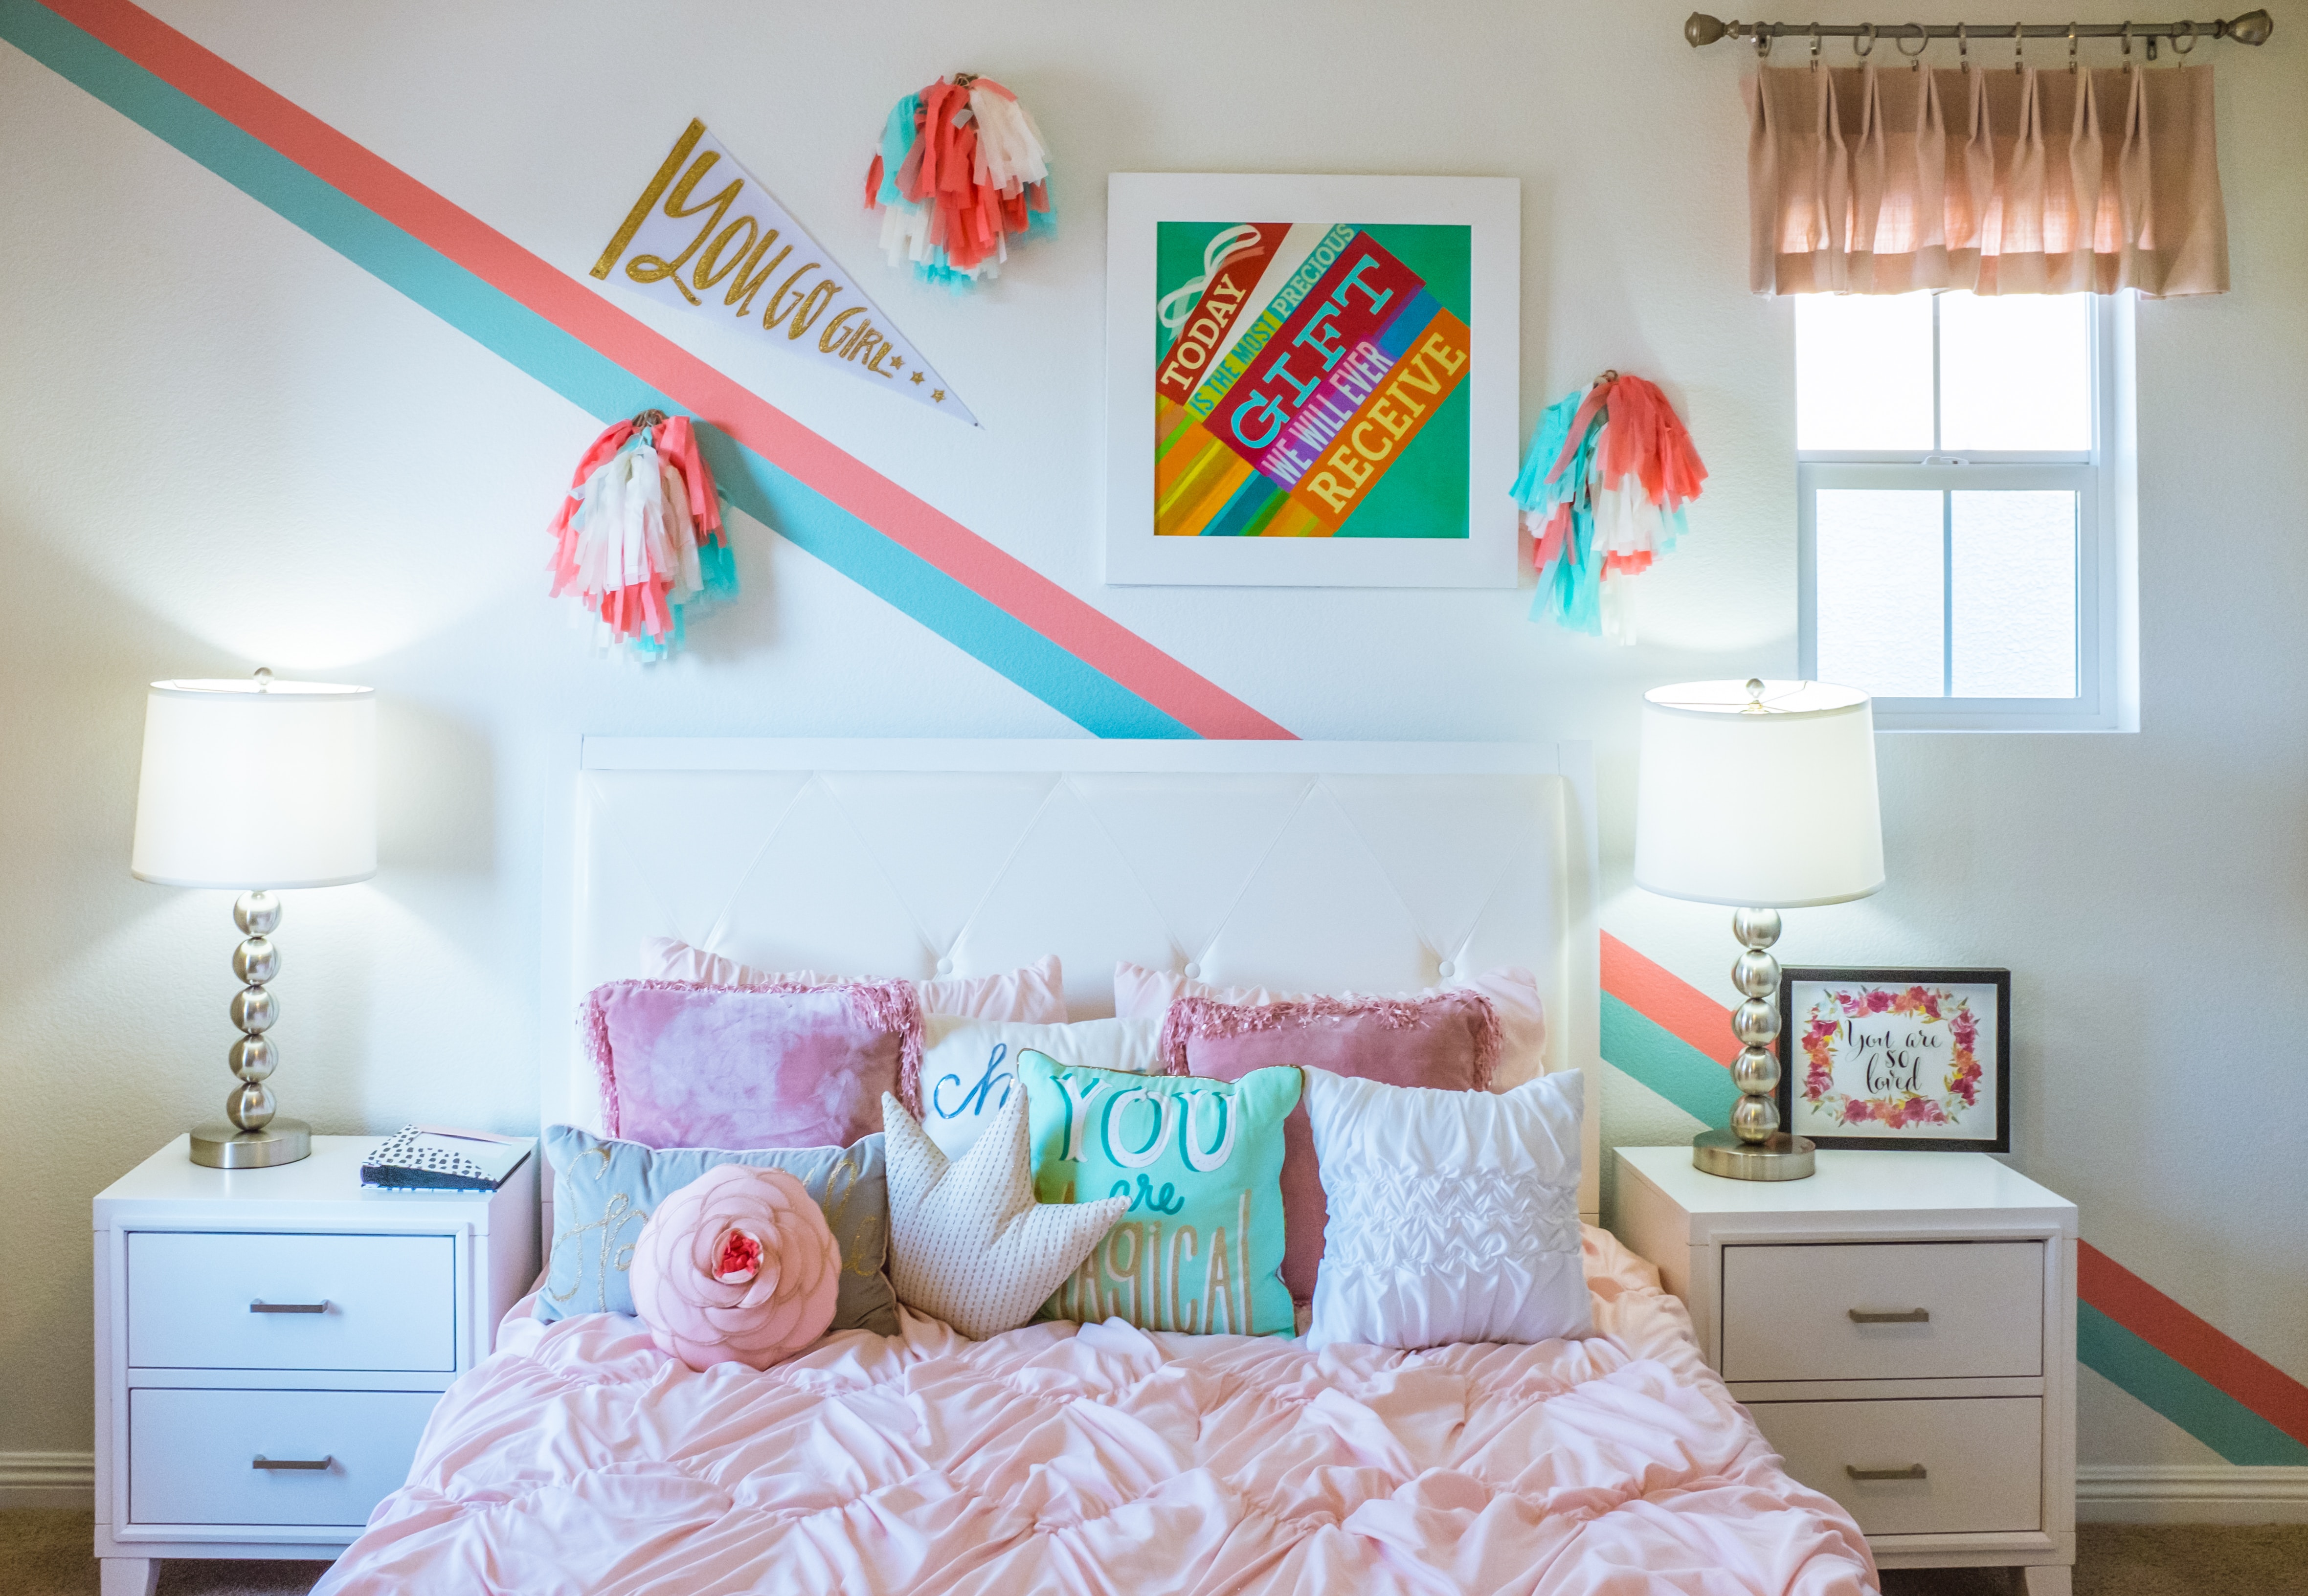 How to Buy Funky Bedroom Furniture for Children